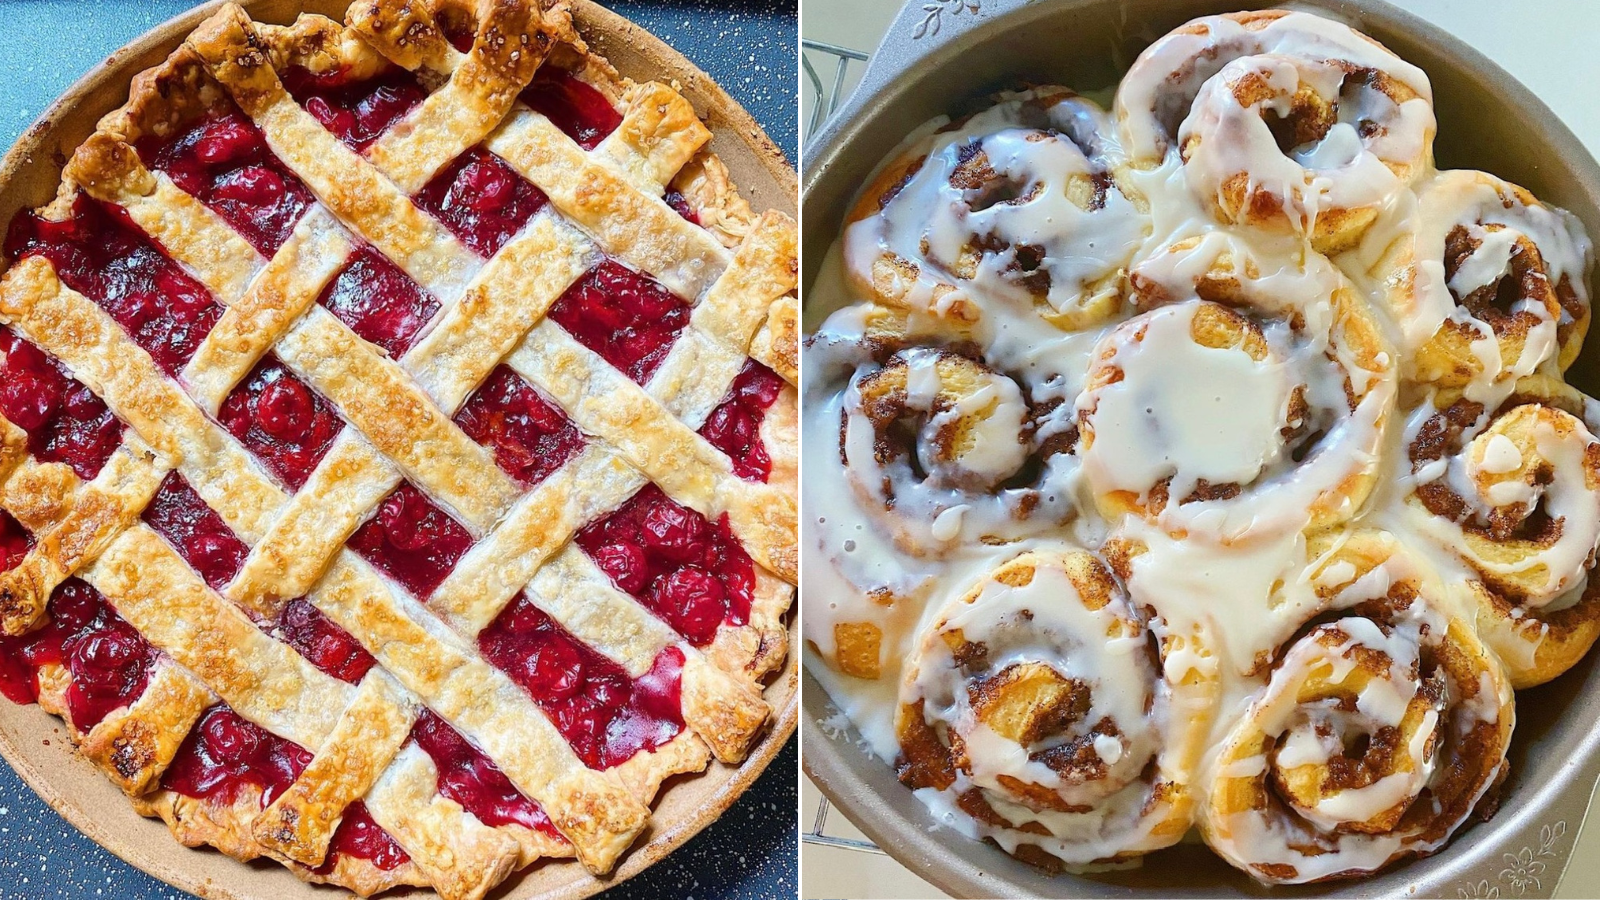 author photos of a homemade cherry pie and homemade glazed cinnamon rolls, both of which were baked in a Cuisinart toaster oven